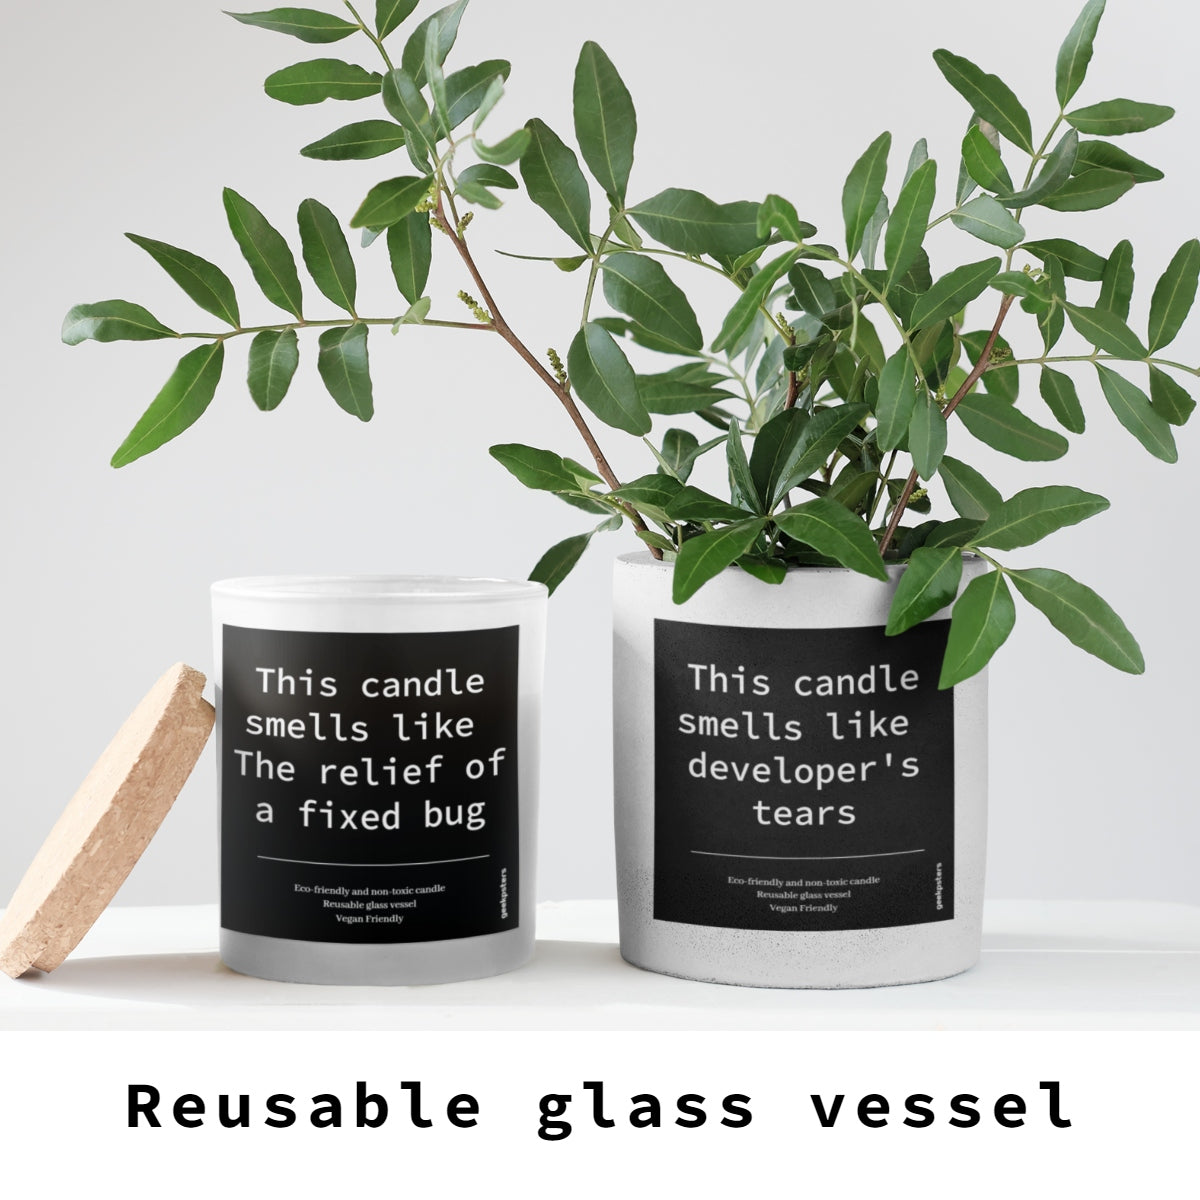 Two Server Room? More Like Server Sauna - Scented Soy Candles in stylish glass jars with humorous labels, accompanied by a fresh plant branch and a wooden item on a light background.